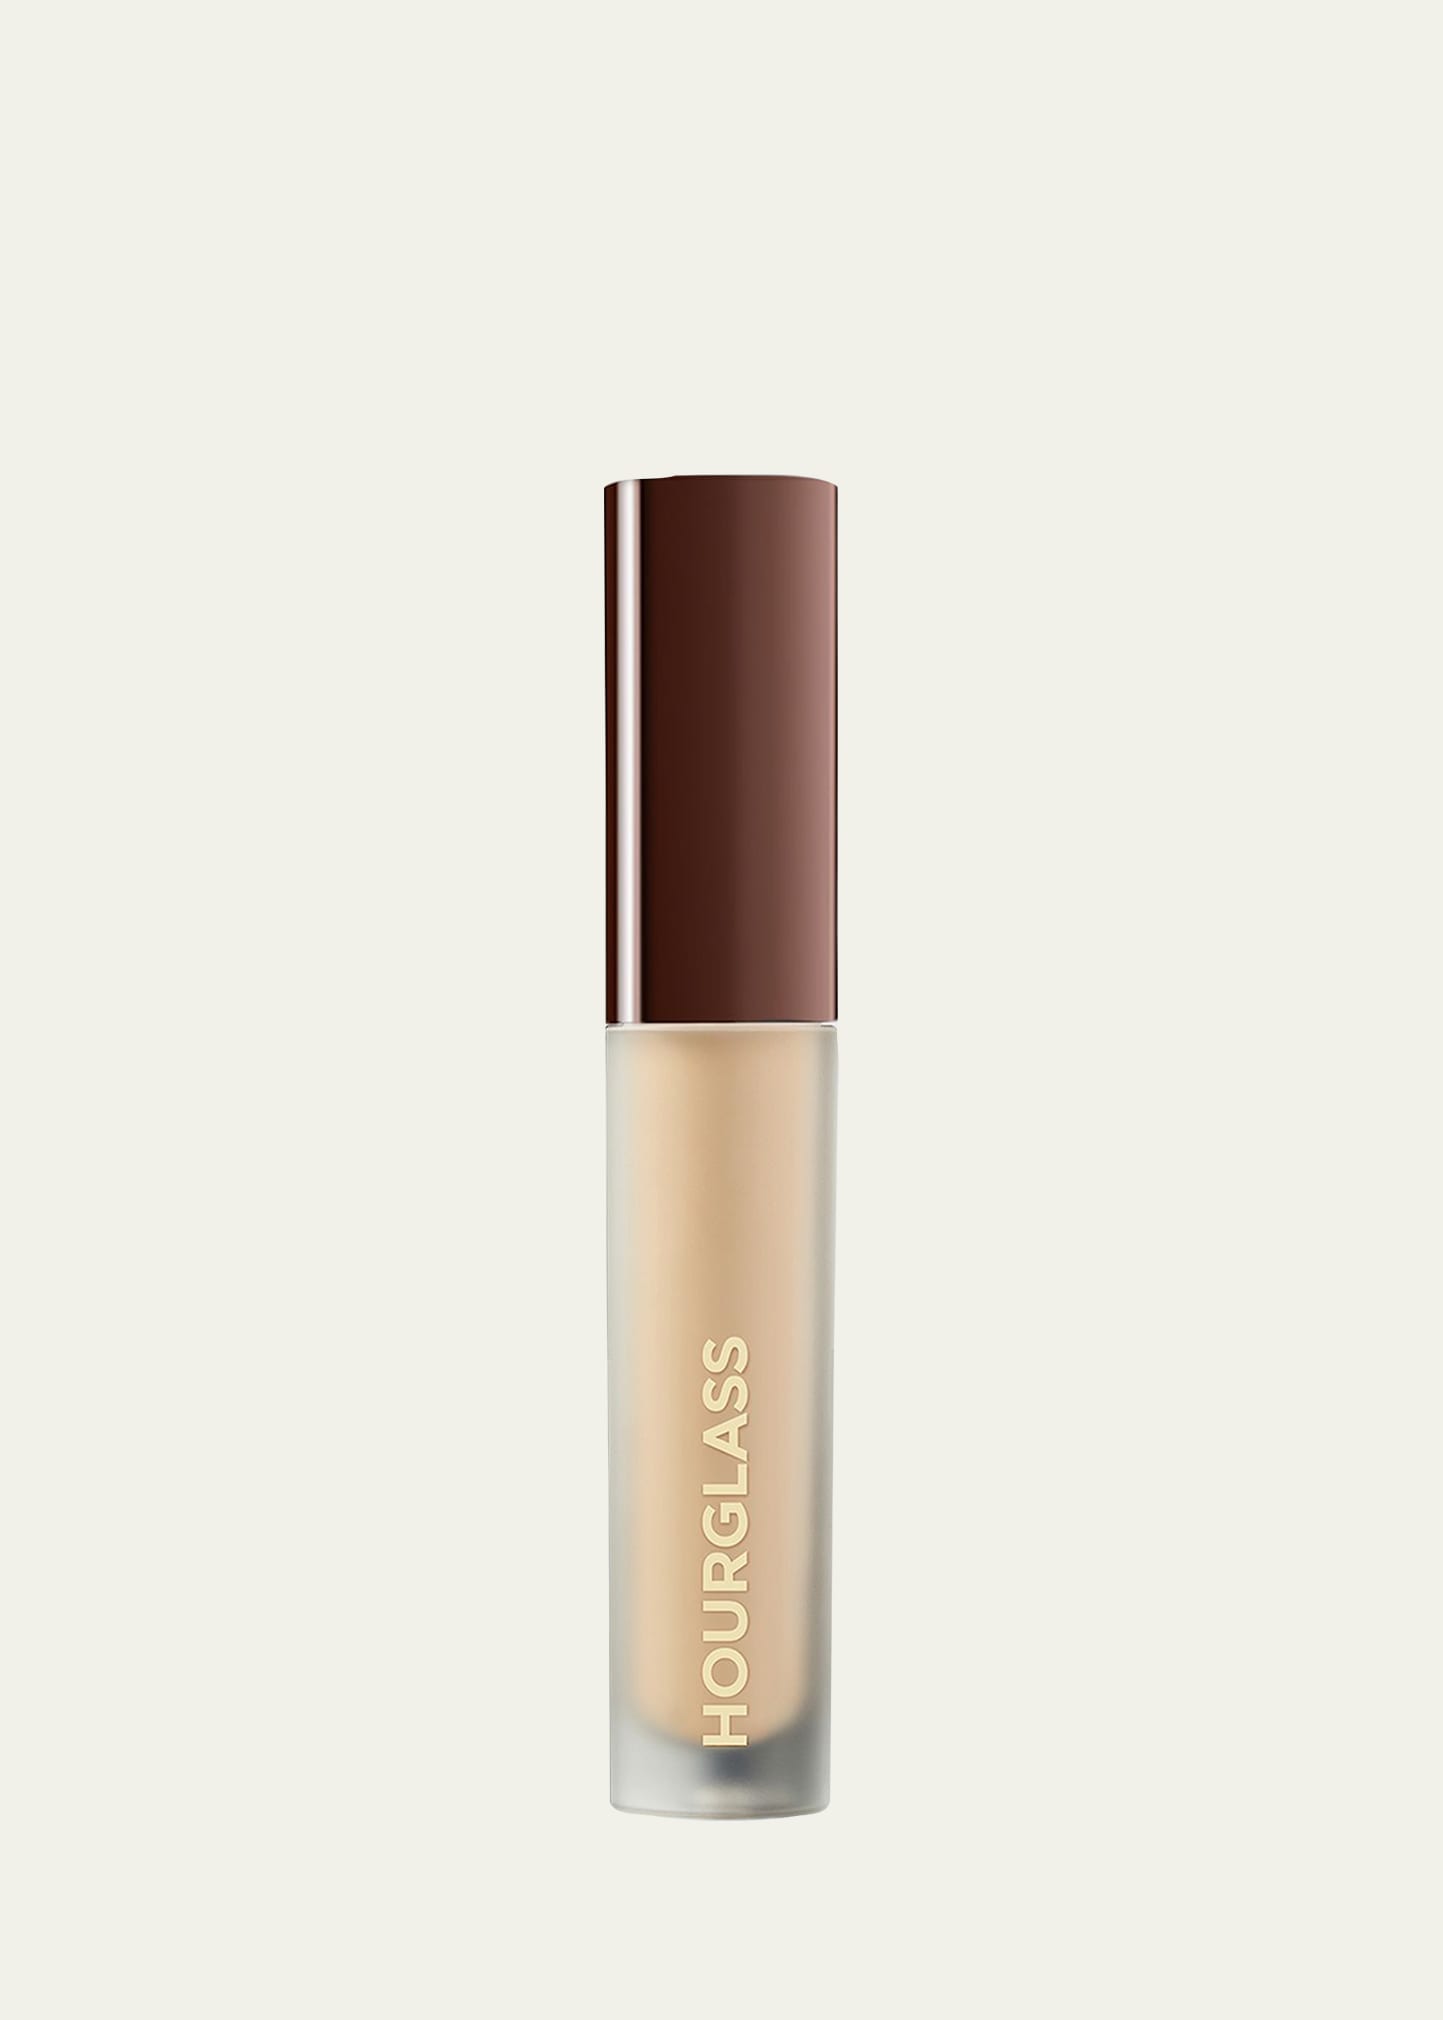 Hourglass Vanish Airbrush Concealer - Travel Size In Cotton 2